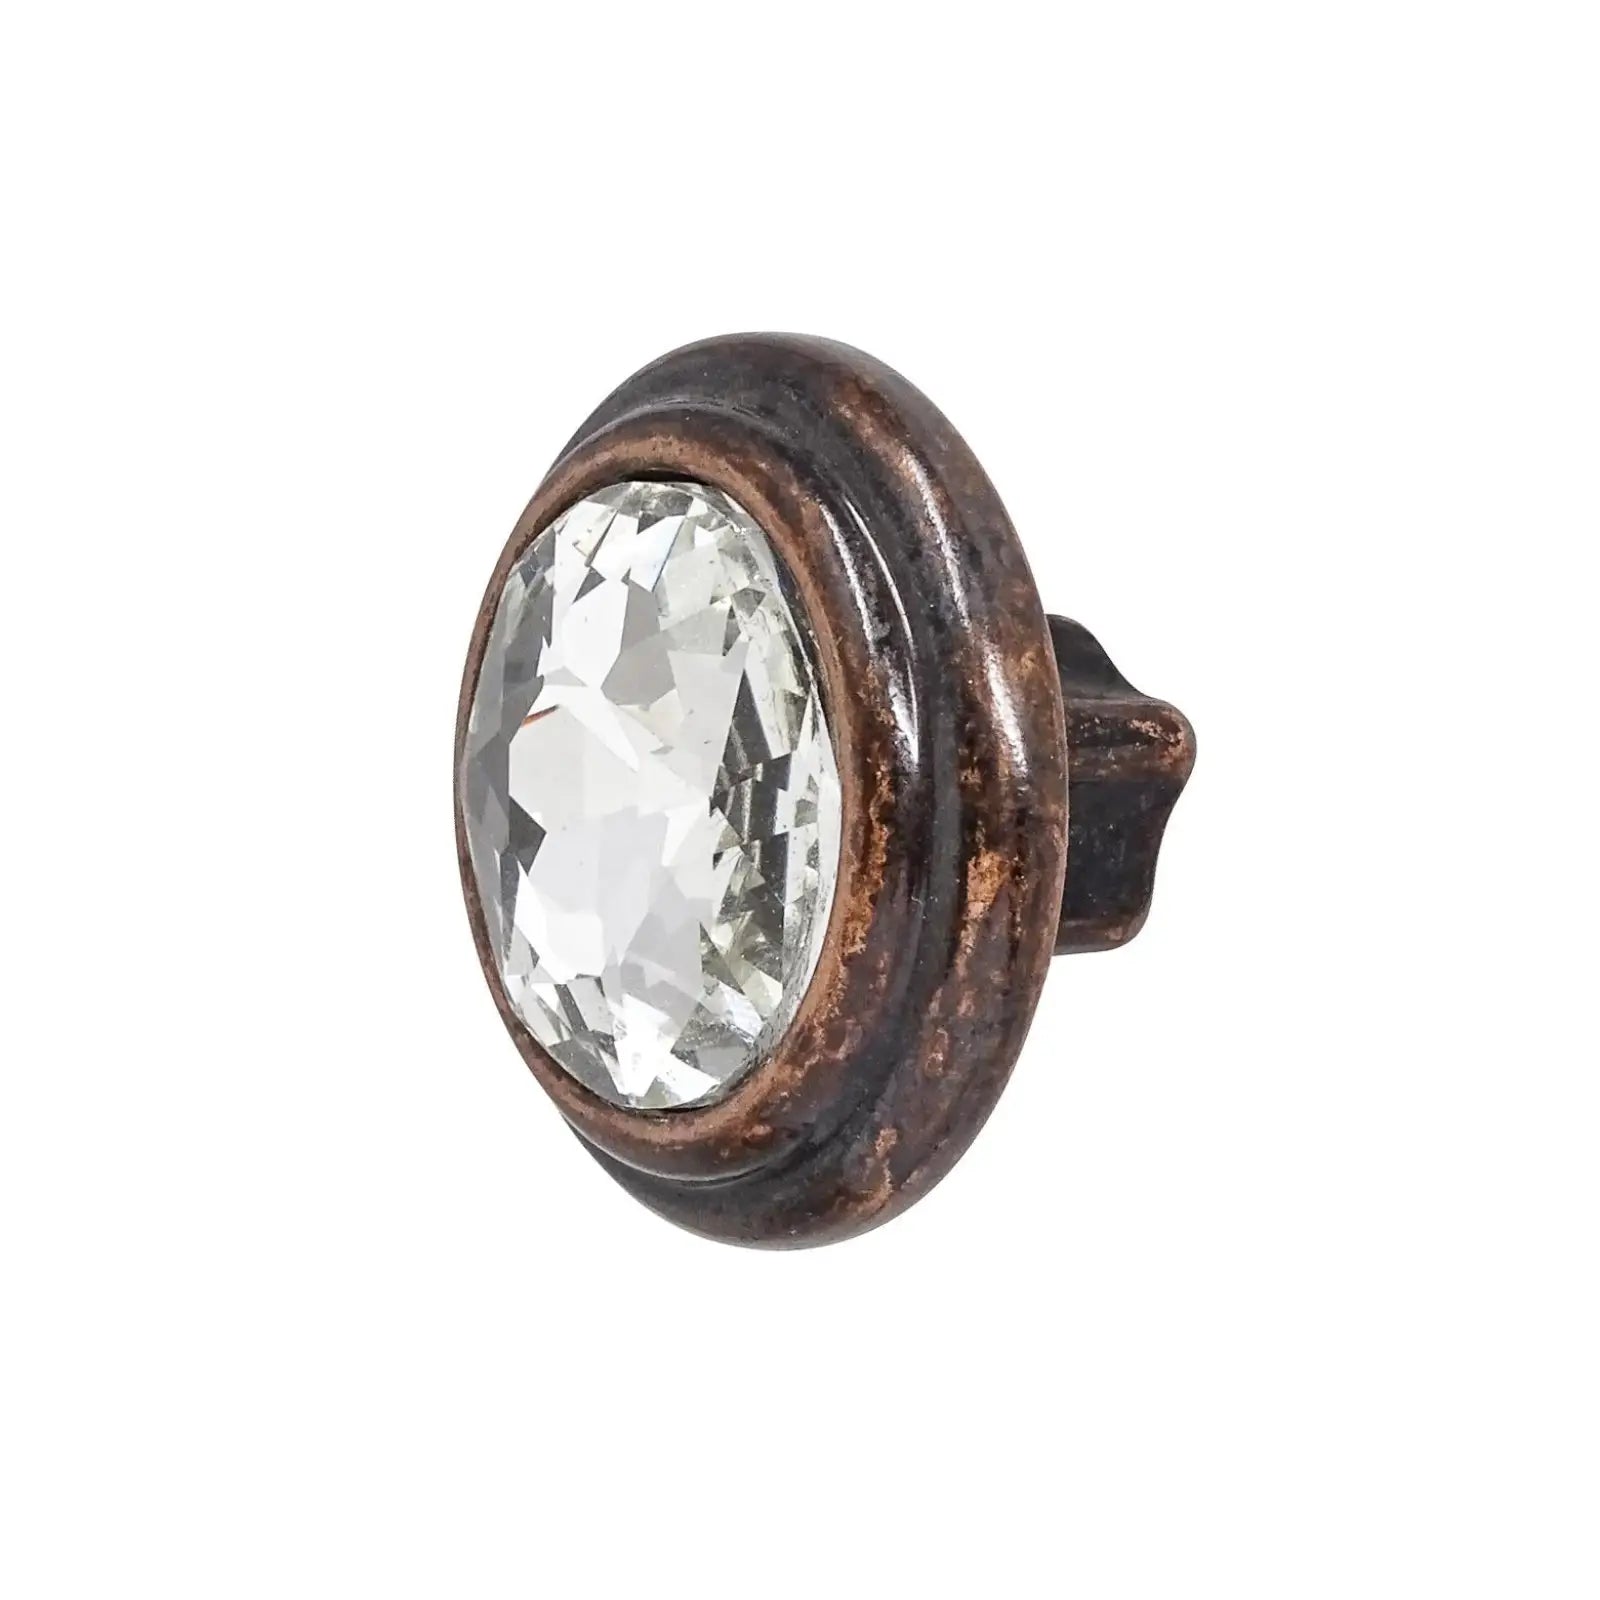 Raywood - Vintage Crystal Glass Cupboard Knob - Antique Copper - Decor And Decor